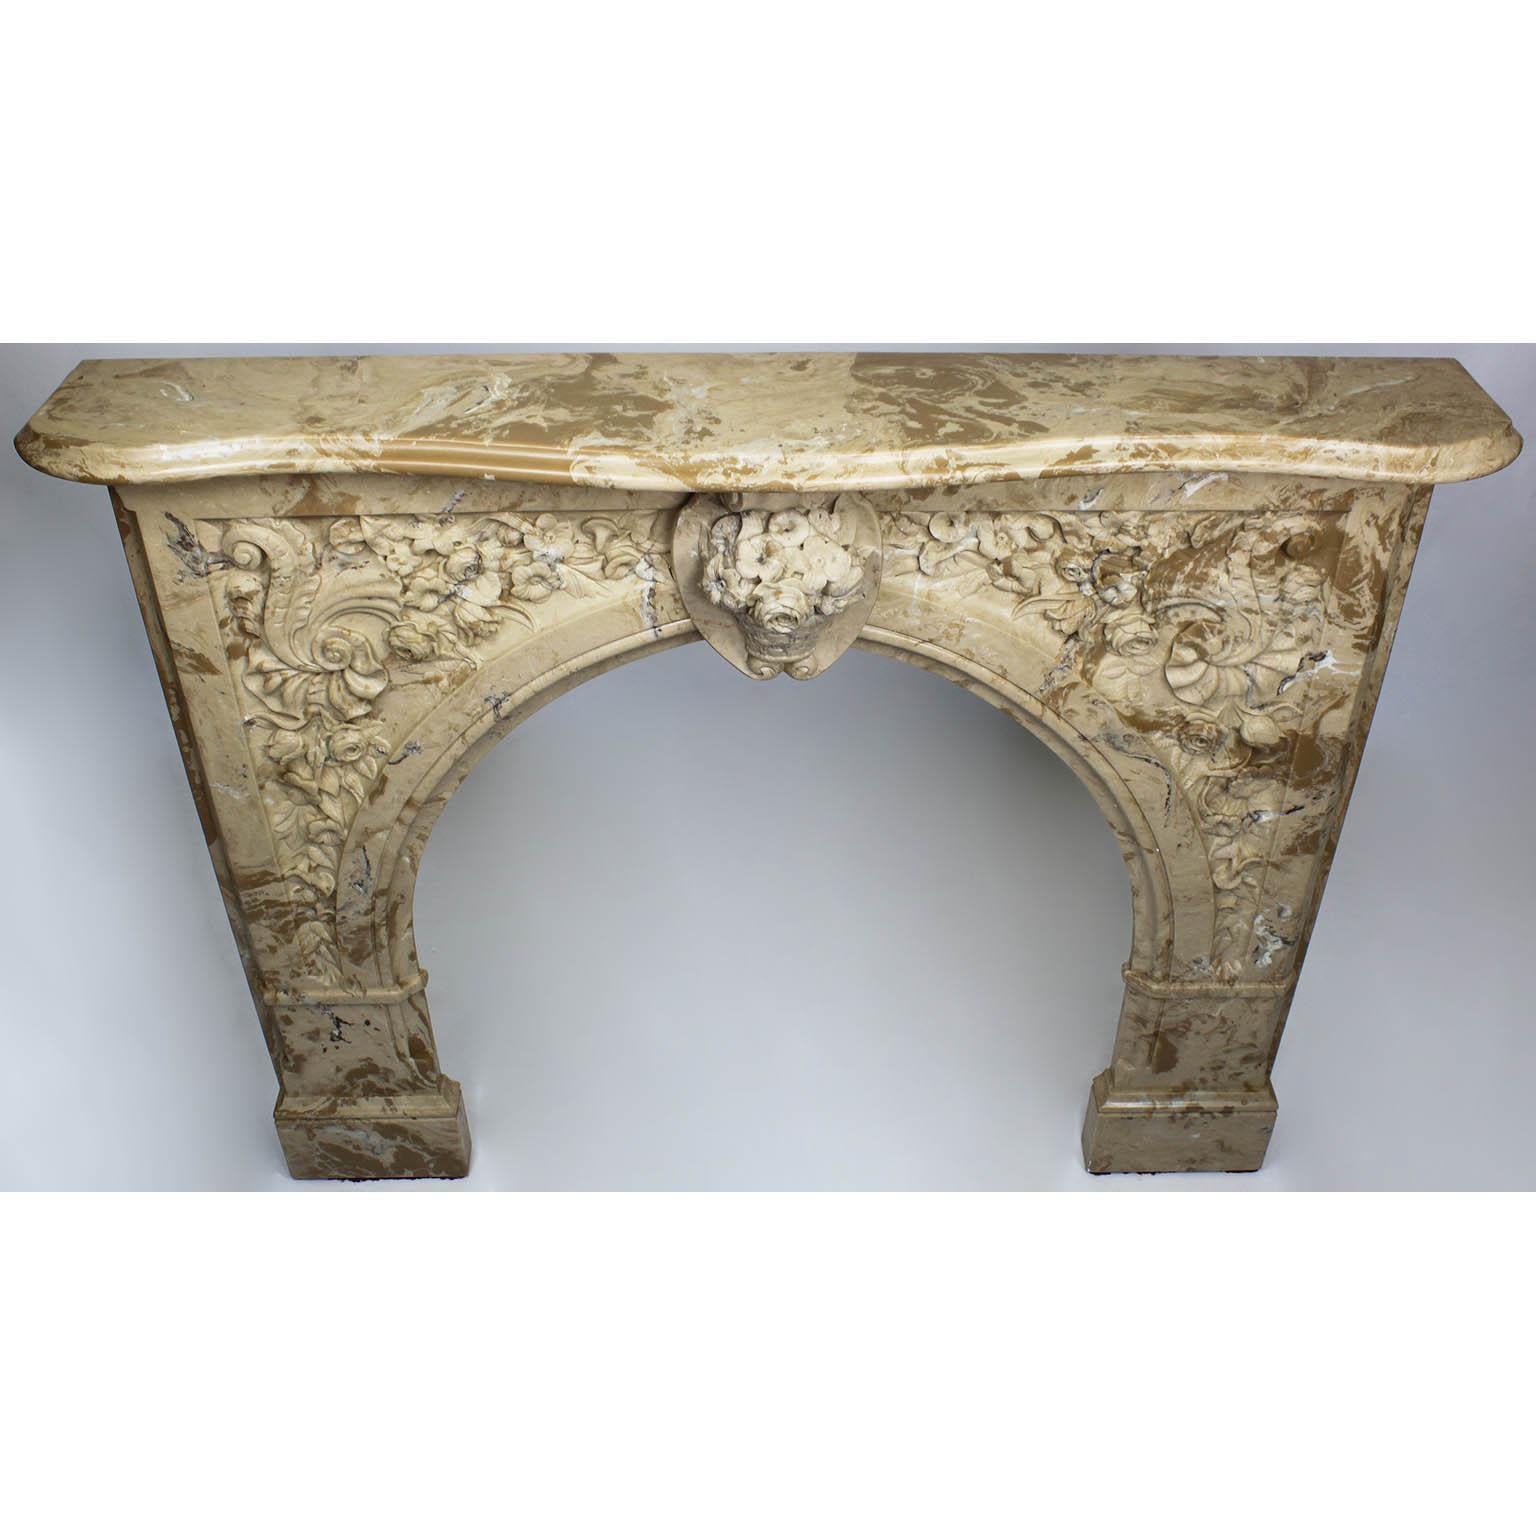 A Louis XV style white and veined beige-brown color cultured cast-marble fireplace mantel. The ornately detailed mantel centered with a basket of flowers flanked by floral and shell themes, circa 20th century.

Measures: Shelf width 59 inches